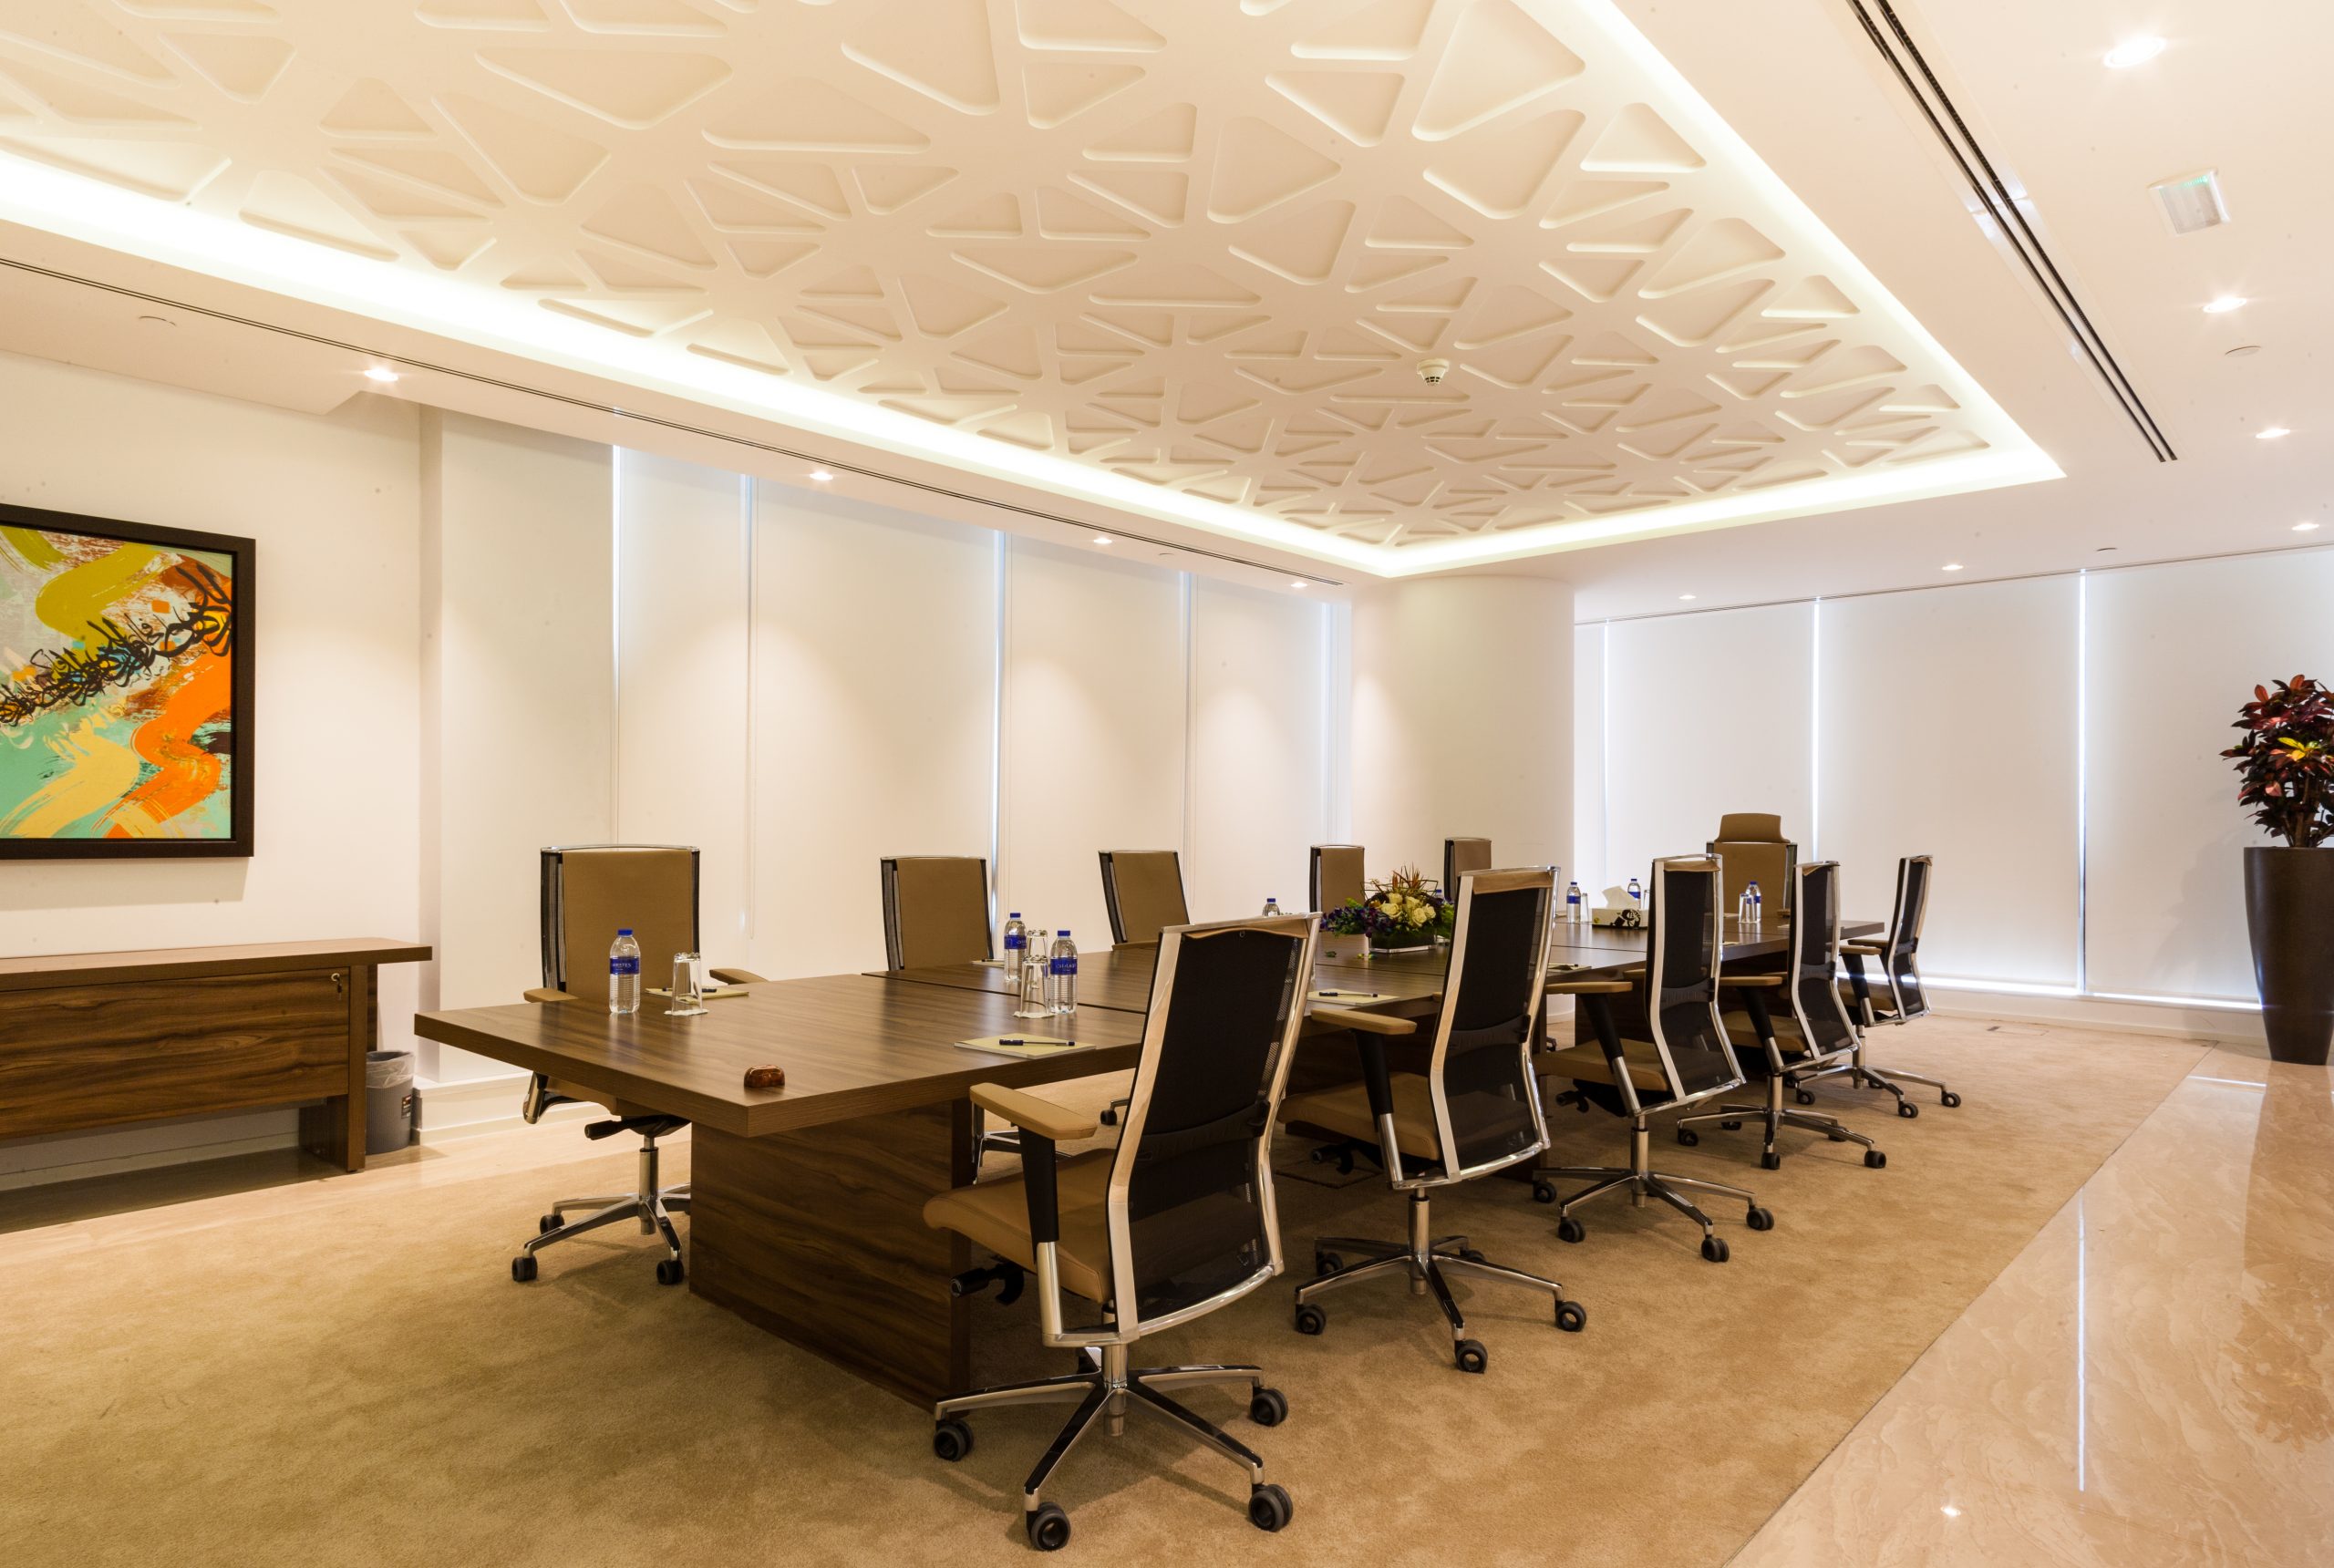 commercial office interior fit out projects | Capstone interior design